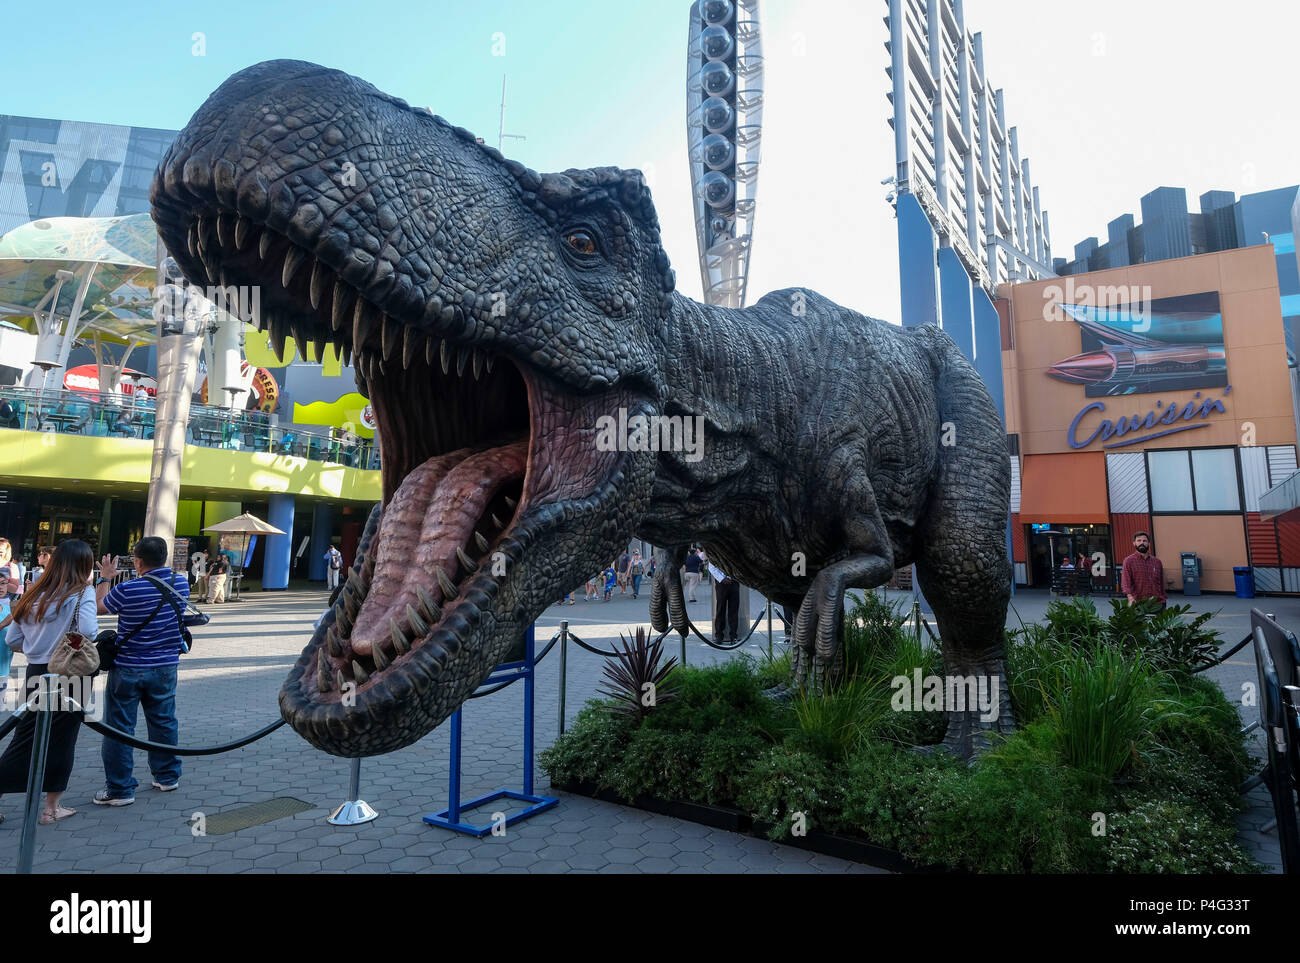 Los Angeles, USA. 21st June, 2018. A giant Tyrannosaurus rex statue is seen at Universal CityWalk in Los Angeles, the United States, on June 21, 2018. For the promotion of the screening of the new film 'Jurassic World: Fallen Kingdom' on Universal Cinema Theatres, a colossal 3-ton Tyrannosaurus rex, a life-sized Gyrosphere original movie prop, as well as original costume, are displayed for public at Universal CityWalk. Credit: Zhao Hanrong/Xinhua/Alamy Live News Stock Photo